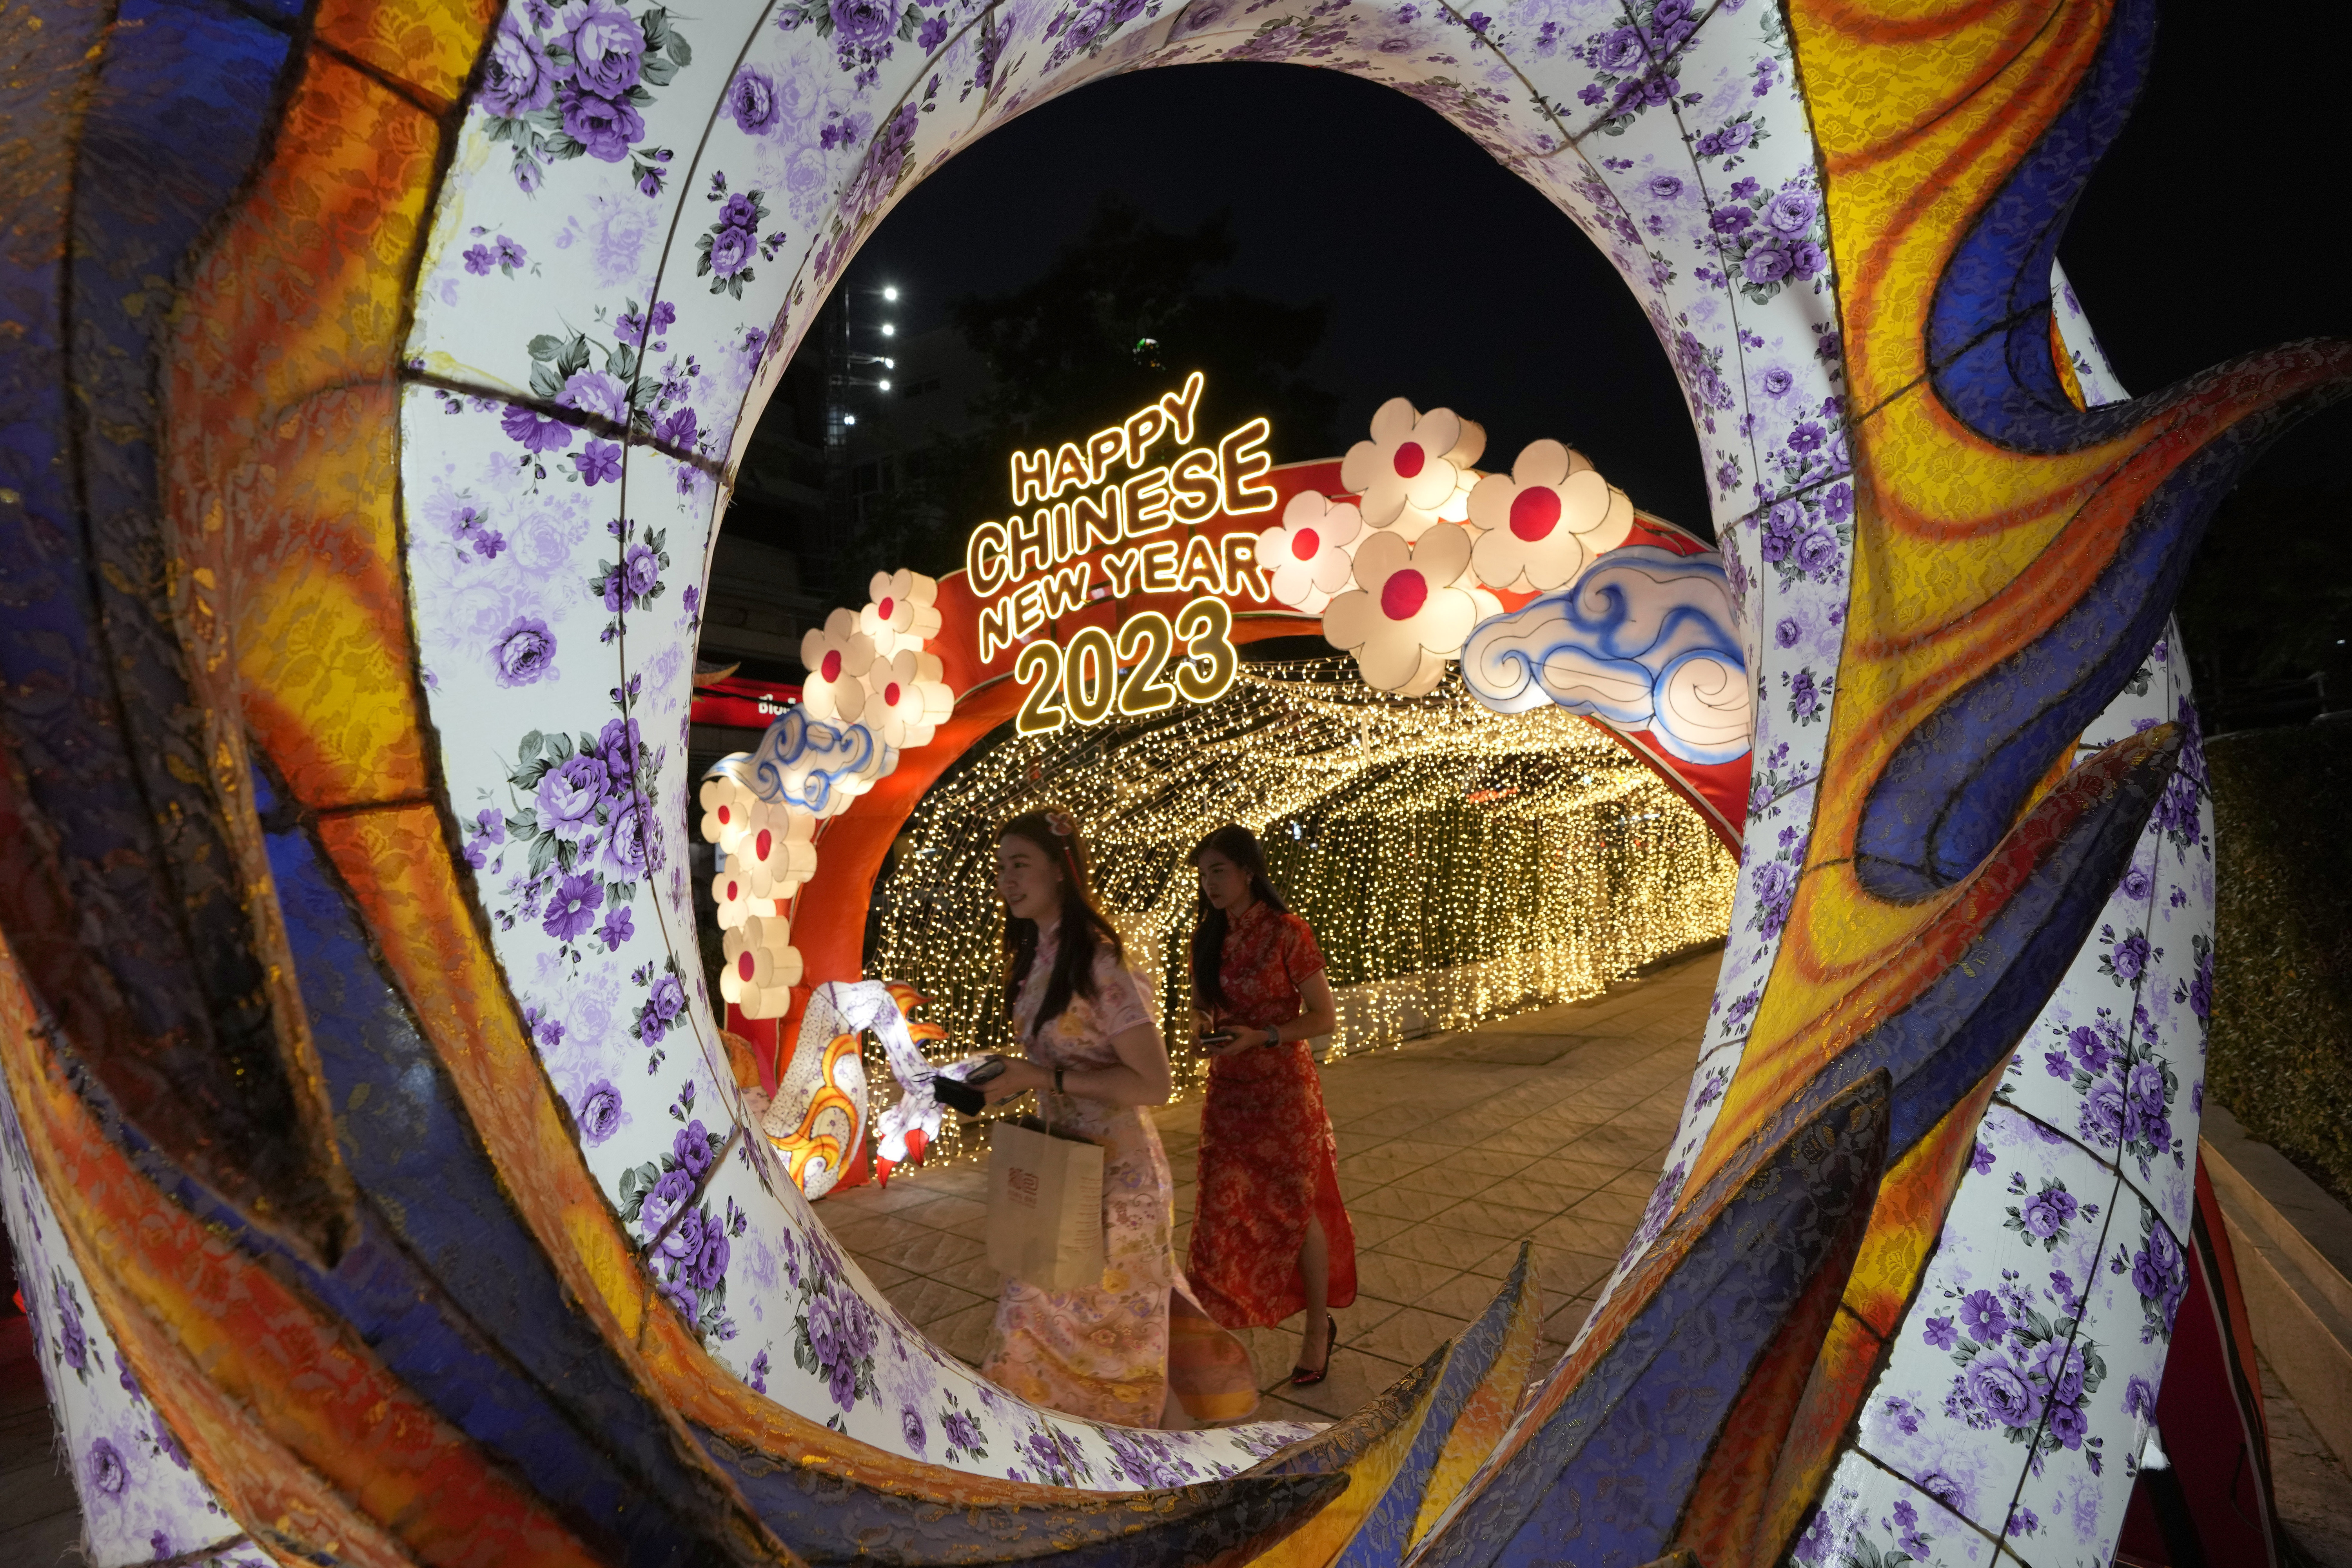 Two women walk past Lunar New Year decorations in Bangkok, Thailand, Thursday, Jan. 19, 2023. The turn of the year is celebrated on Jan. 22, kicking off the Year of the Rabbit, according to the lunar calendar.  (AP Photo/Sakchai Lalit)